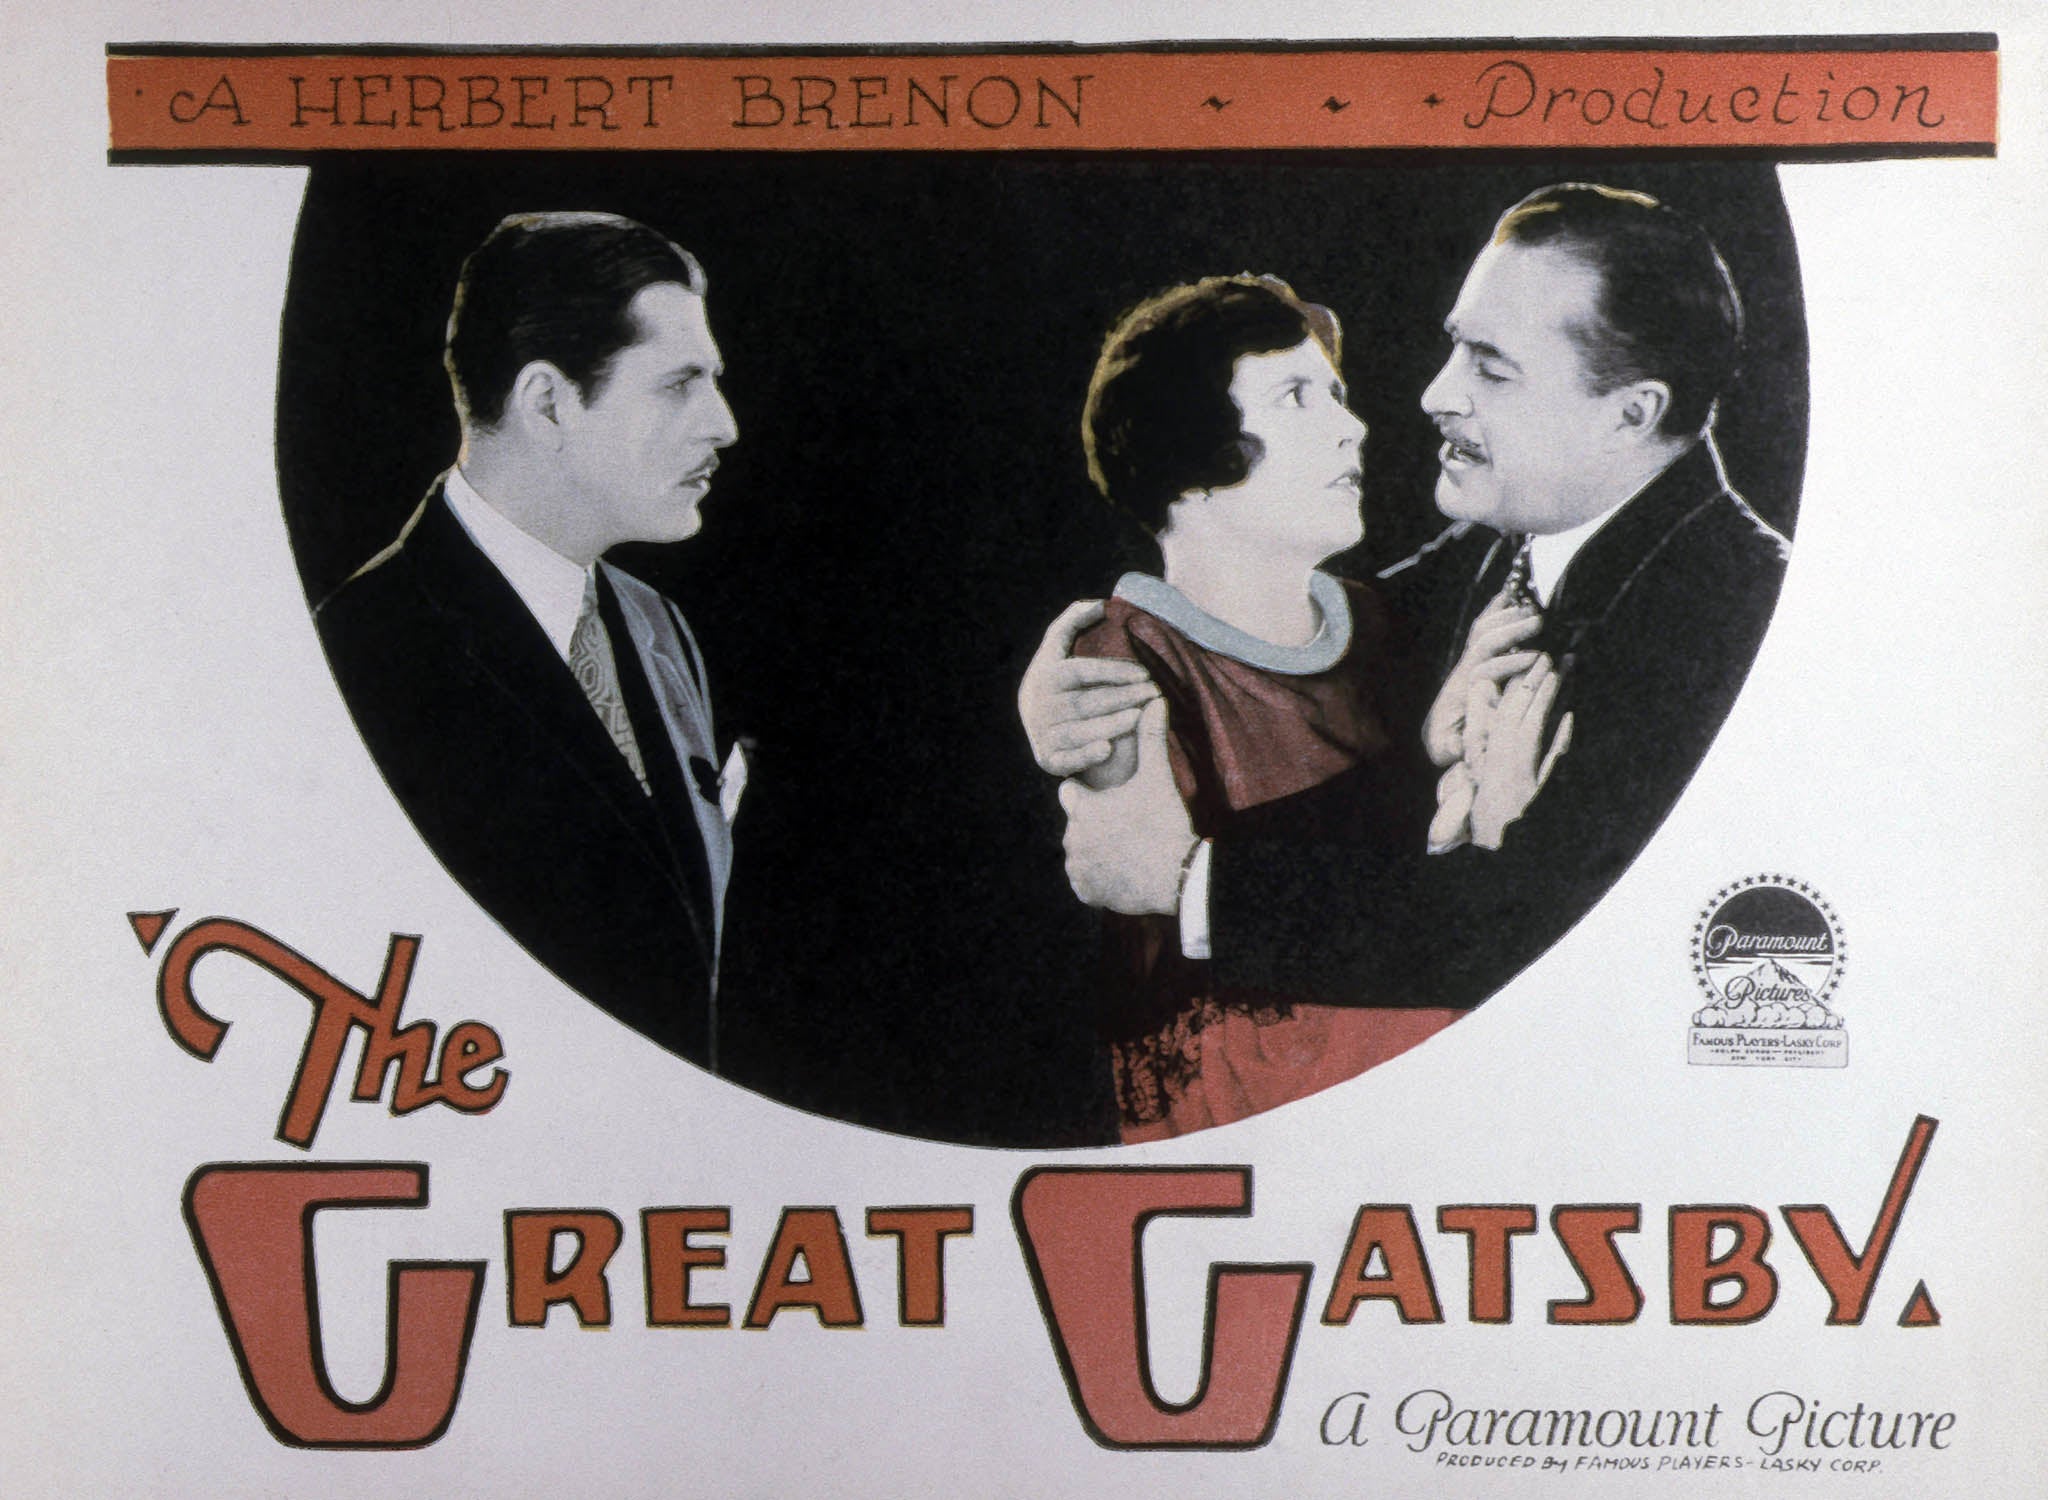 Silent film The Great Gatsby is believed lost in its complete form. From left: Warner Baxter, Lois Wilson, Hale Hamilton, 1926